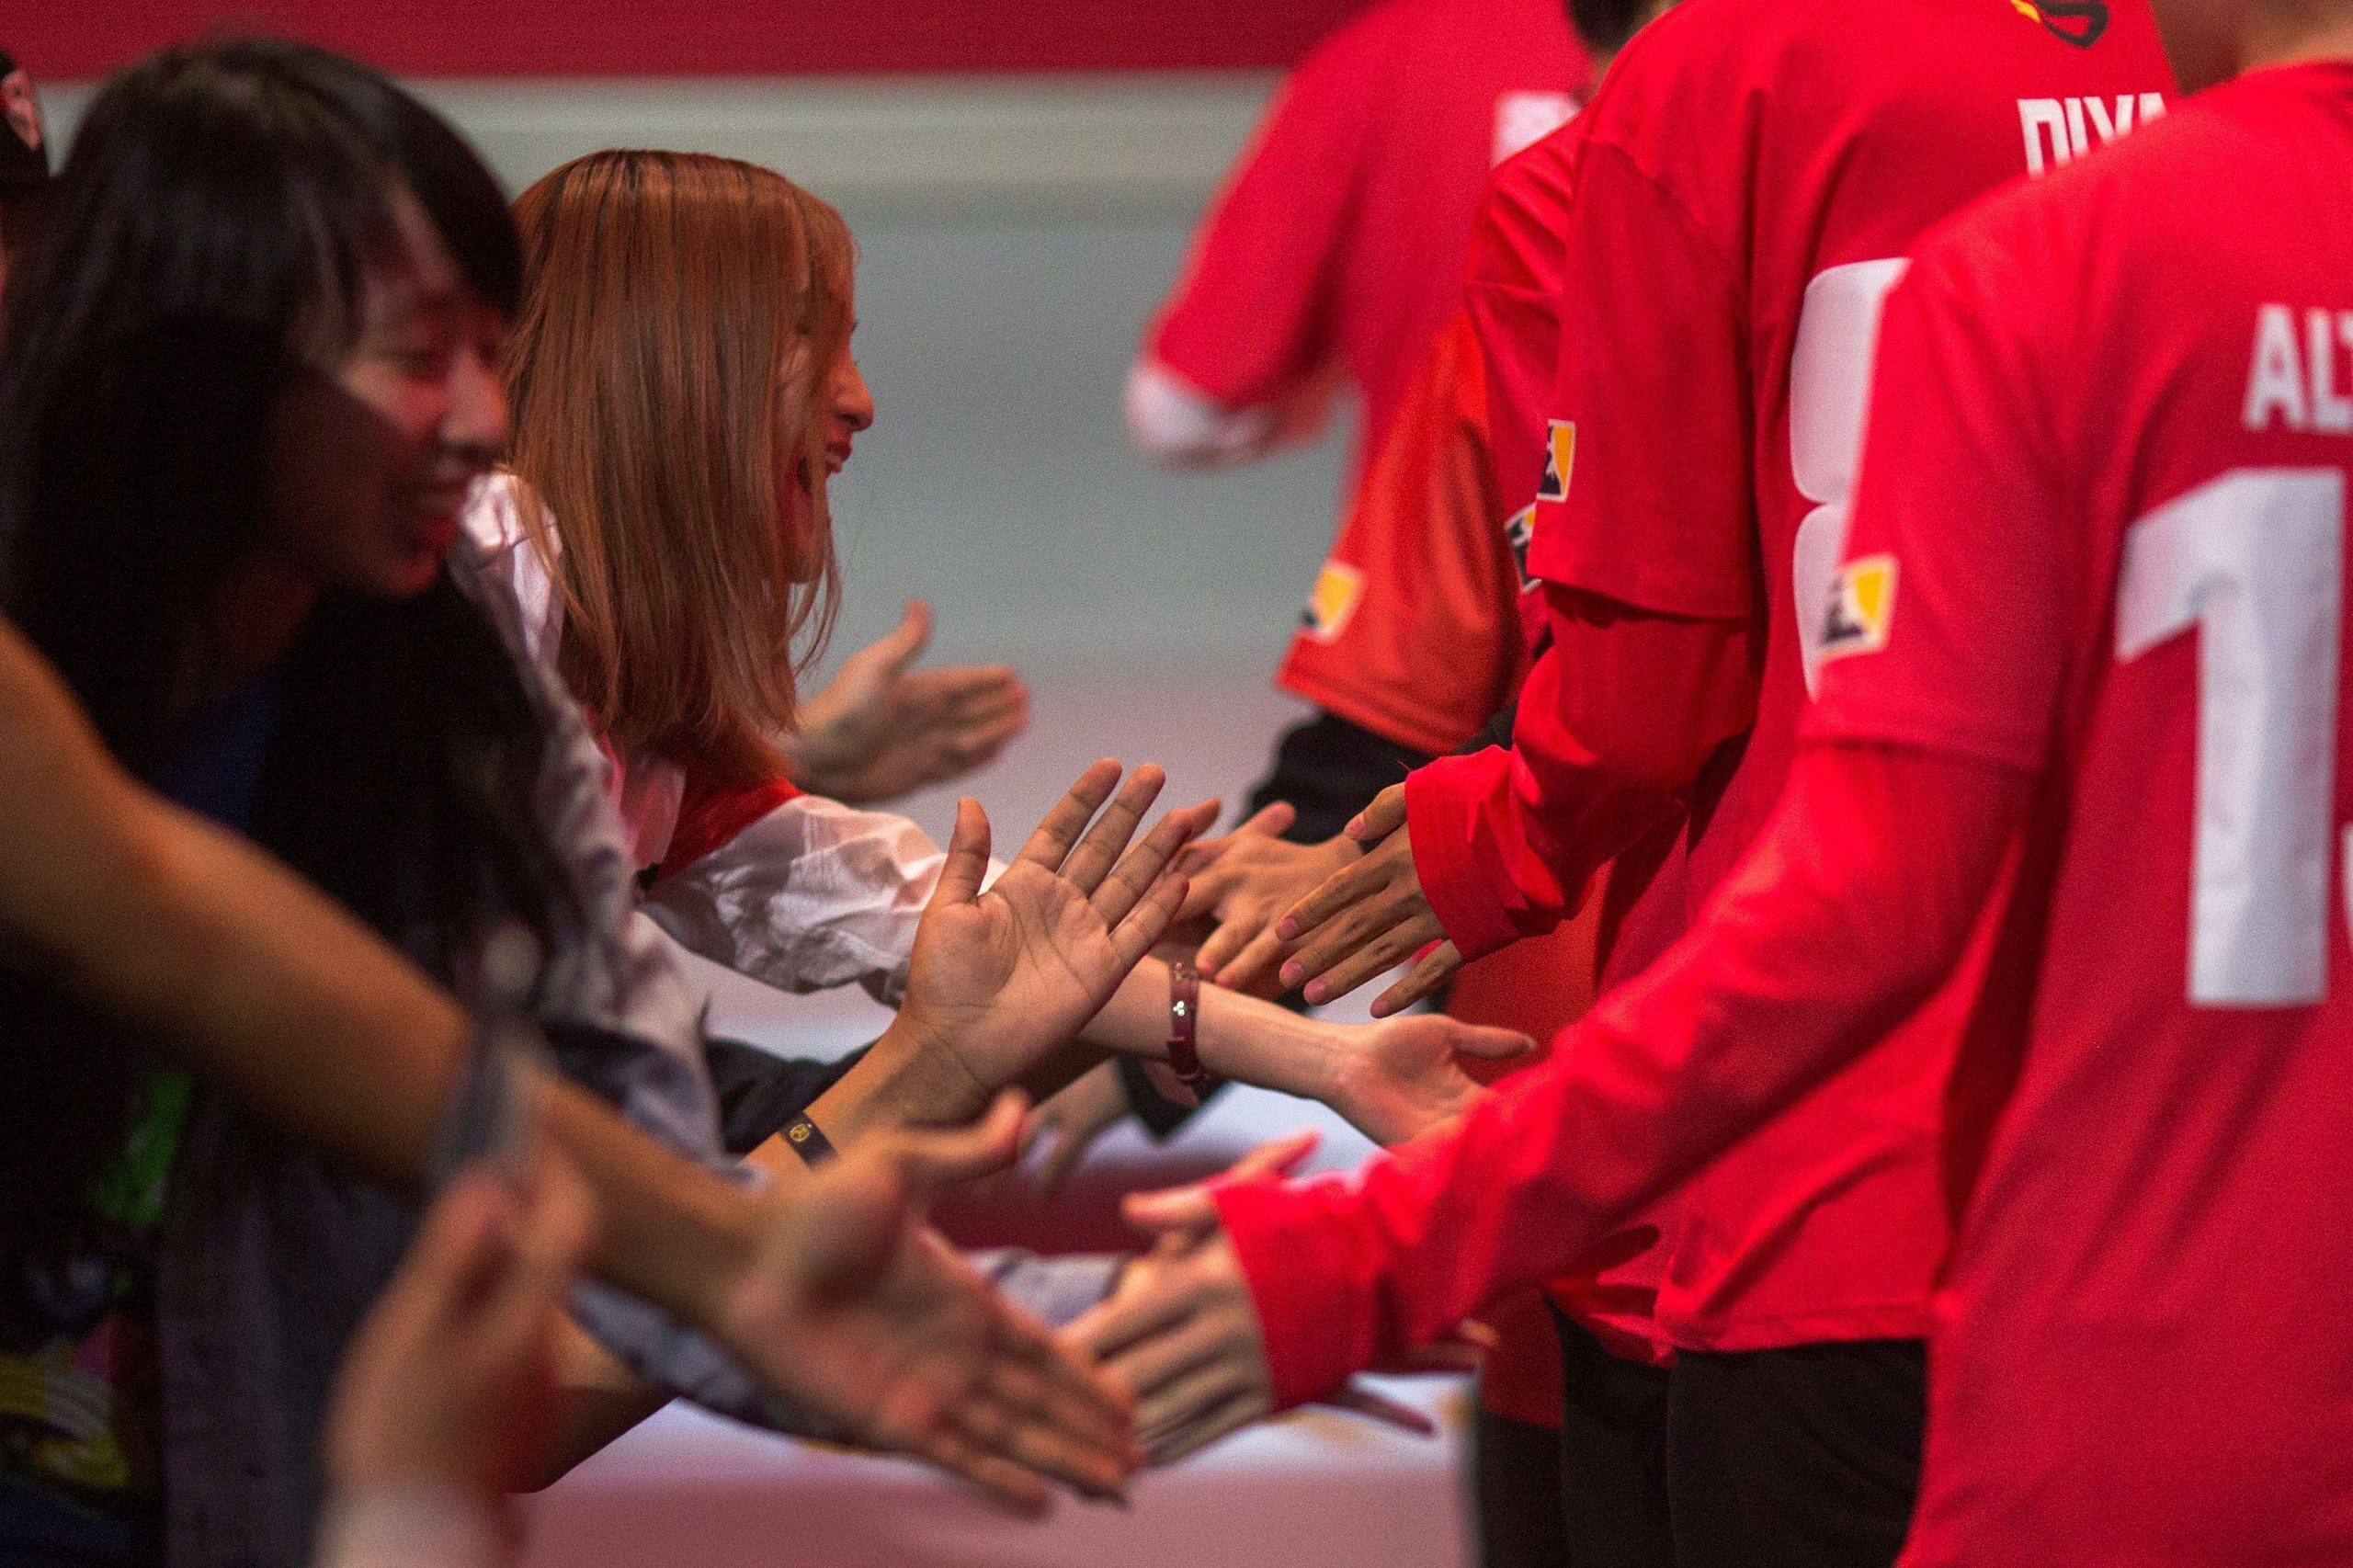 Fans reach out to Shanghai Dragons players as they prepare to play the New York Excelsior. (DAVID MCNEW/AFP/Getty Images)